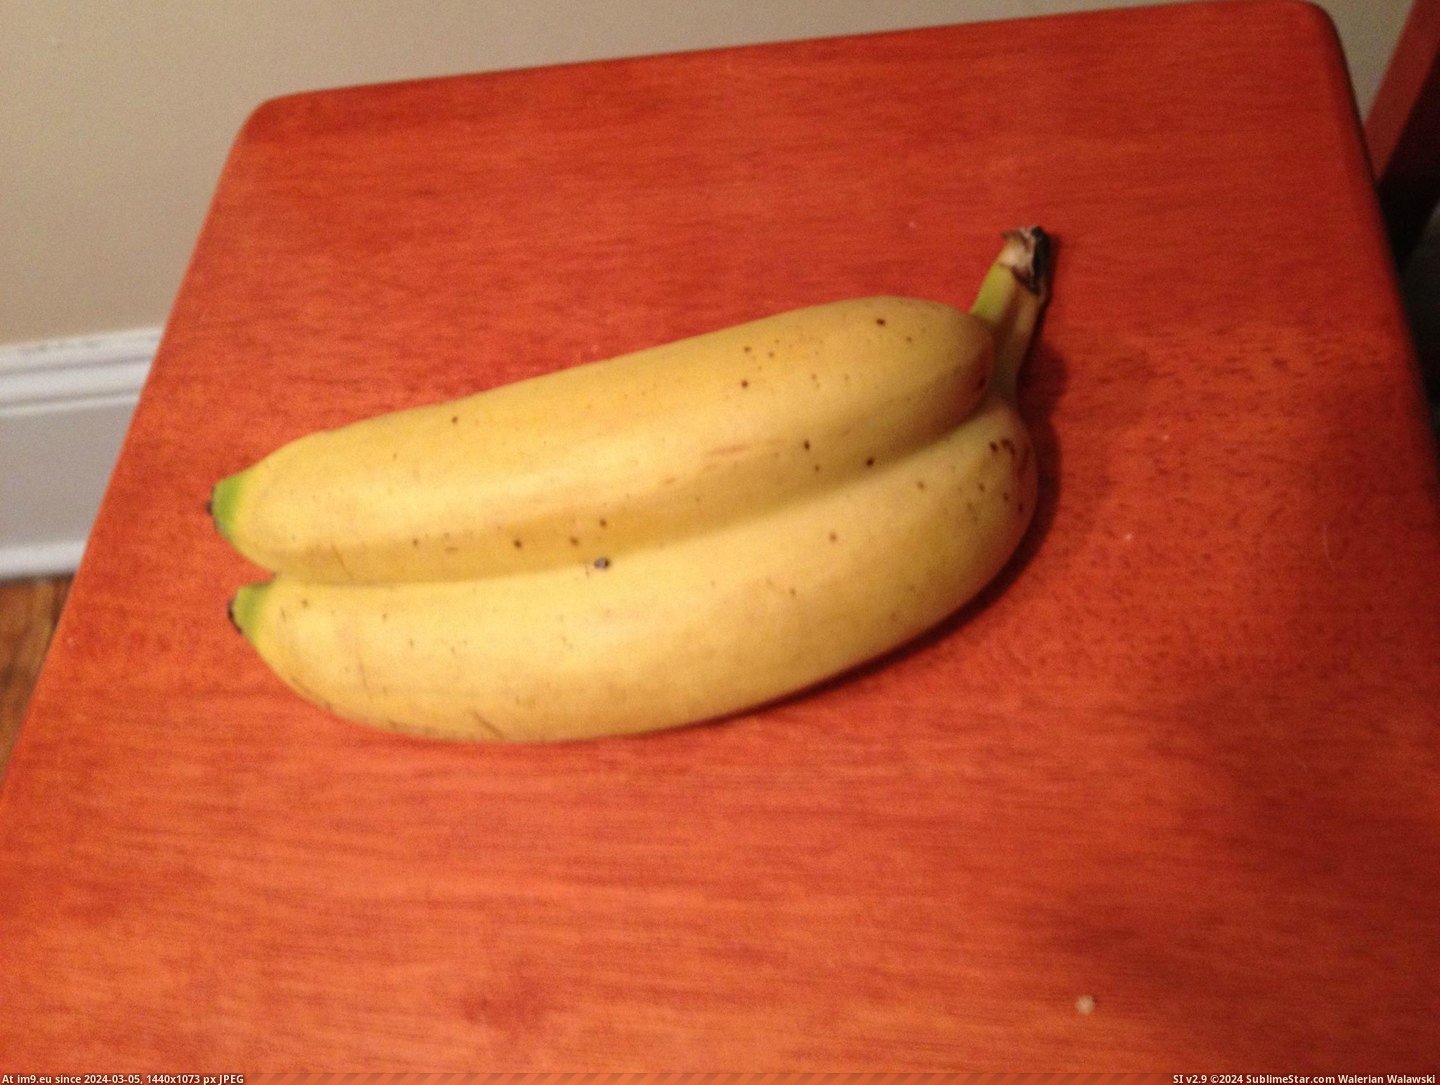 #Two #Bananas #Fused #Are [Mildlyinteresting] These two bananas are fused together Pic. (Bild von album My r/MILDLYINTERESTING favs))